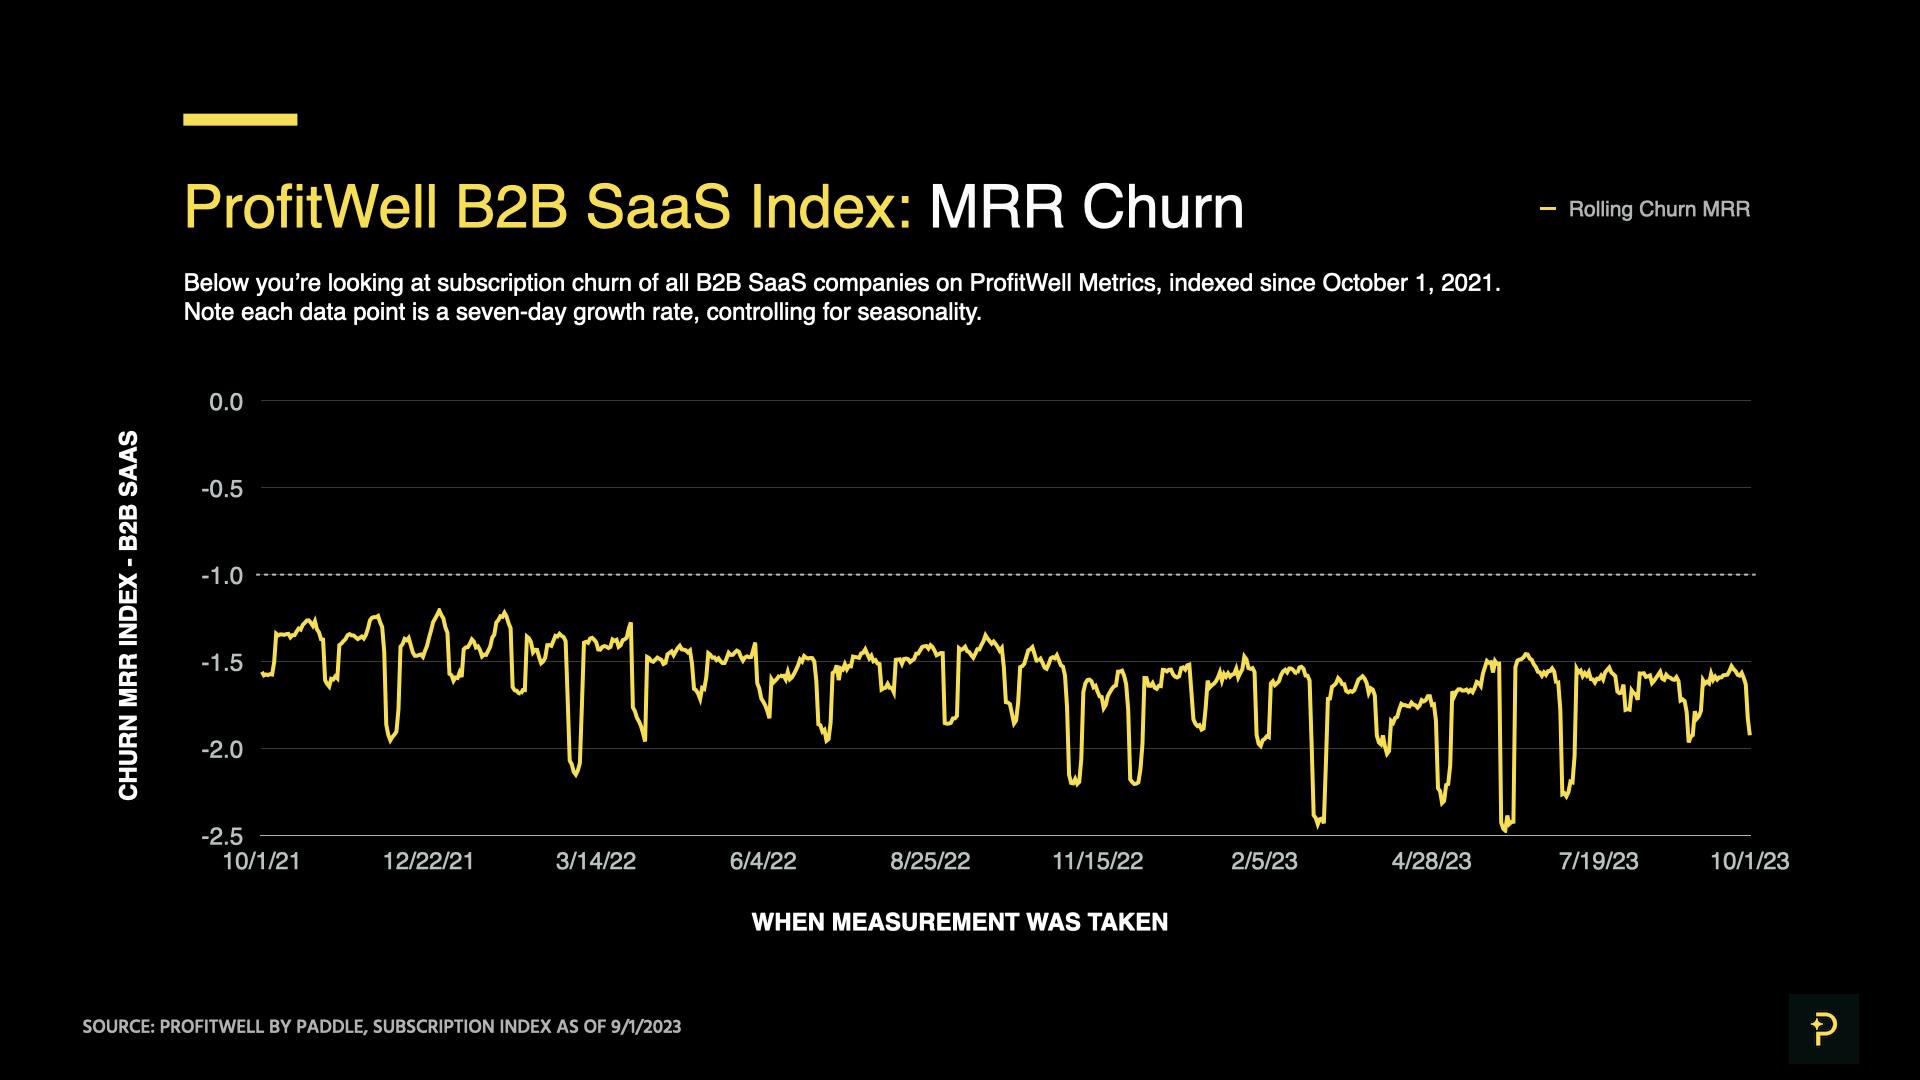 ProfitWell B2B SaaS Churn Index as of October 1, 2023 - MRR impact of churning customers